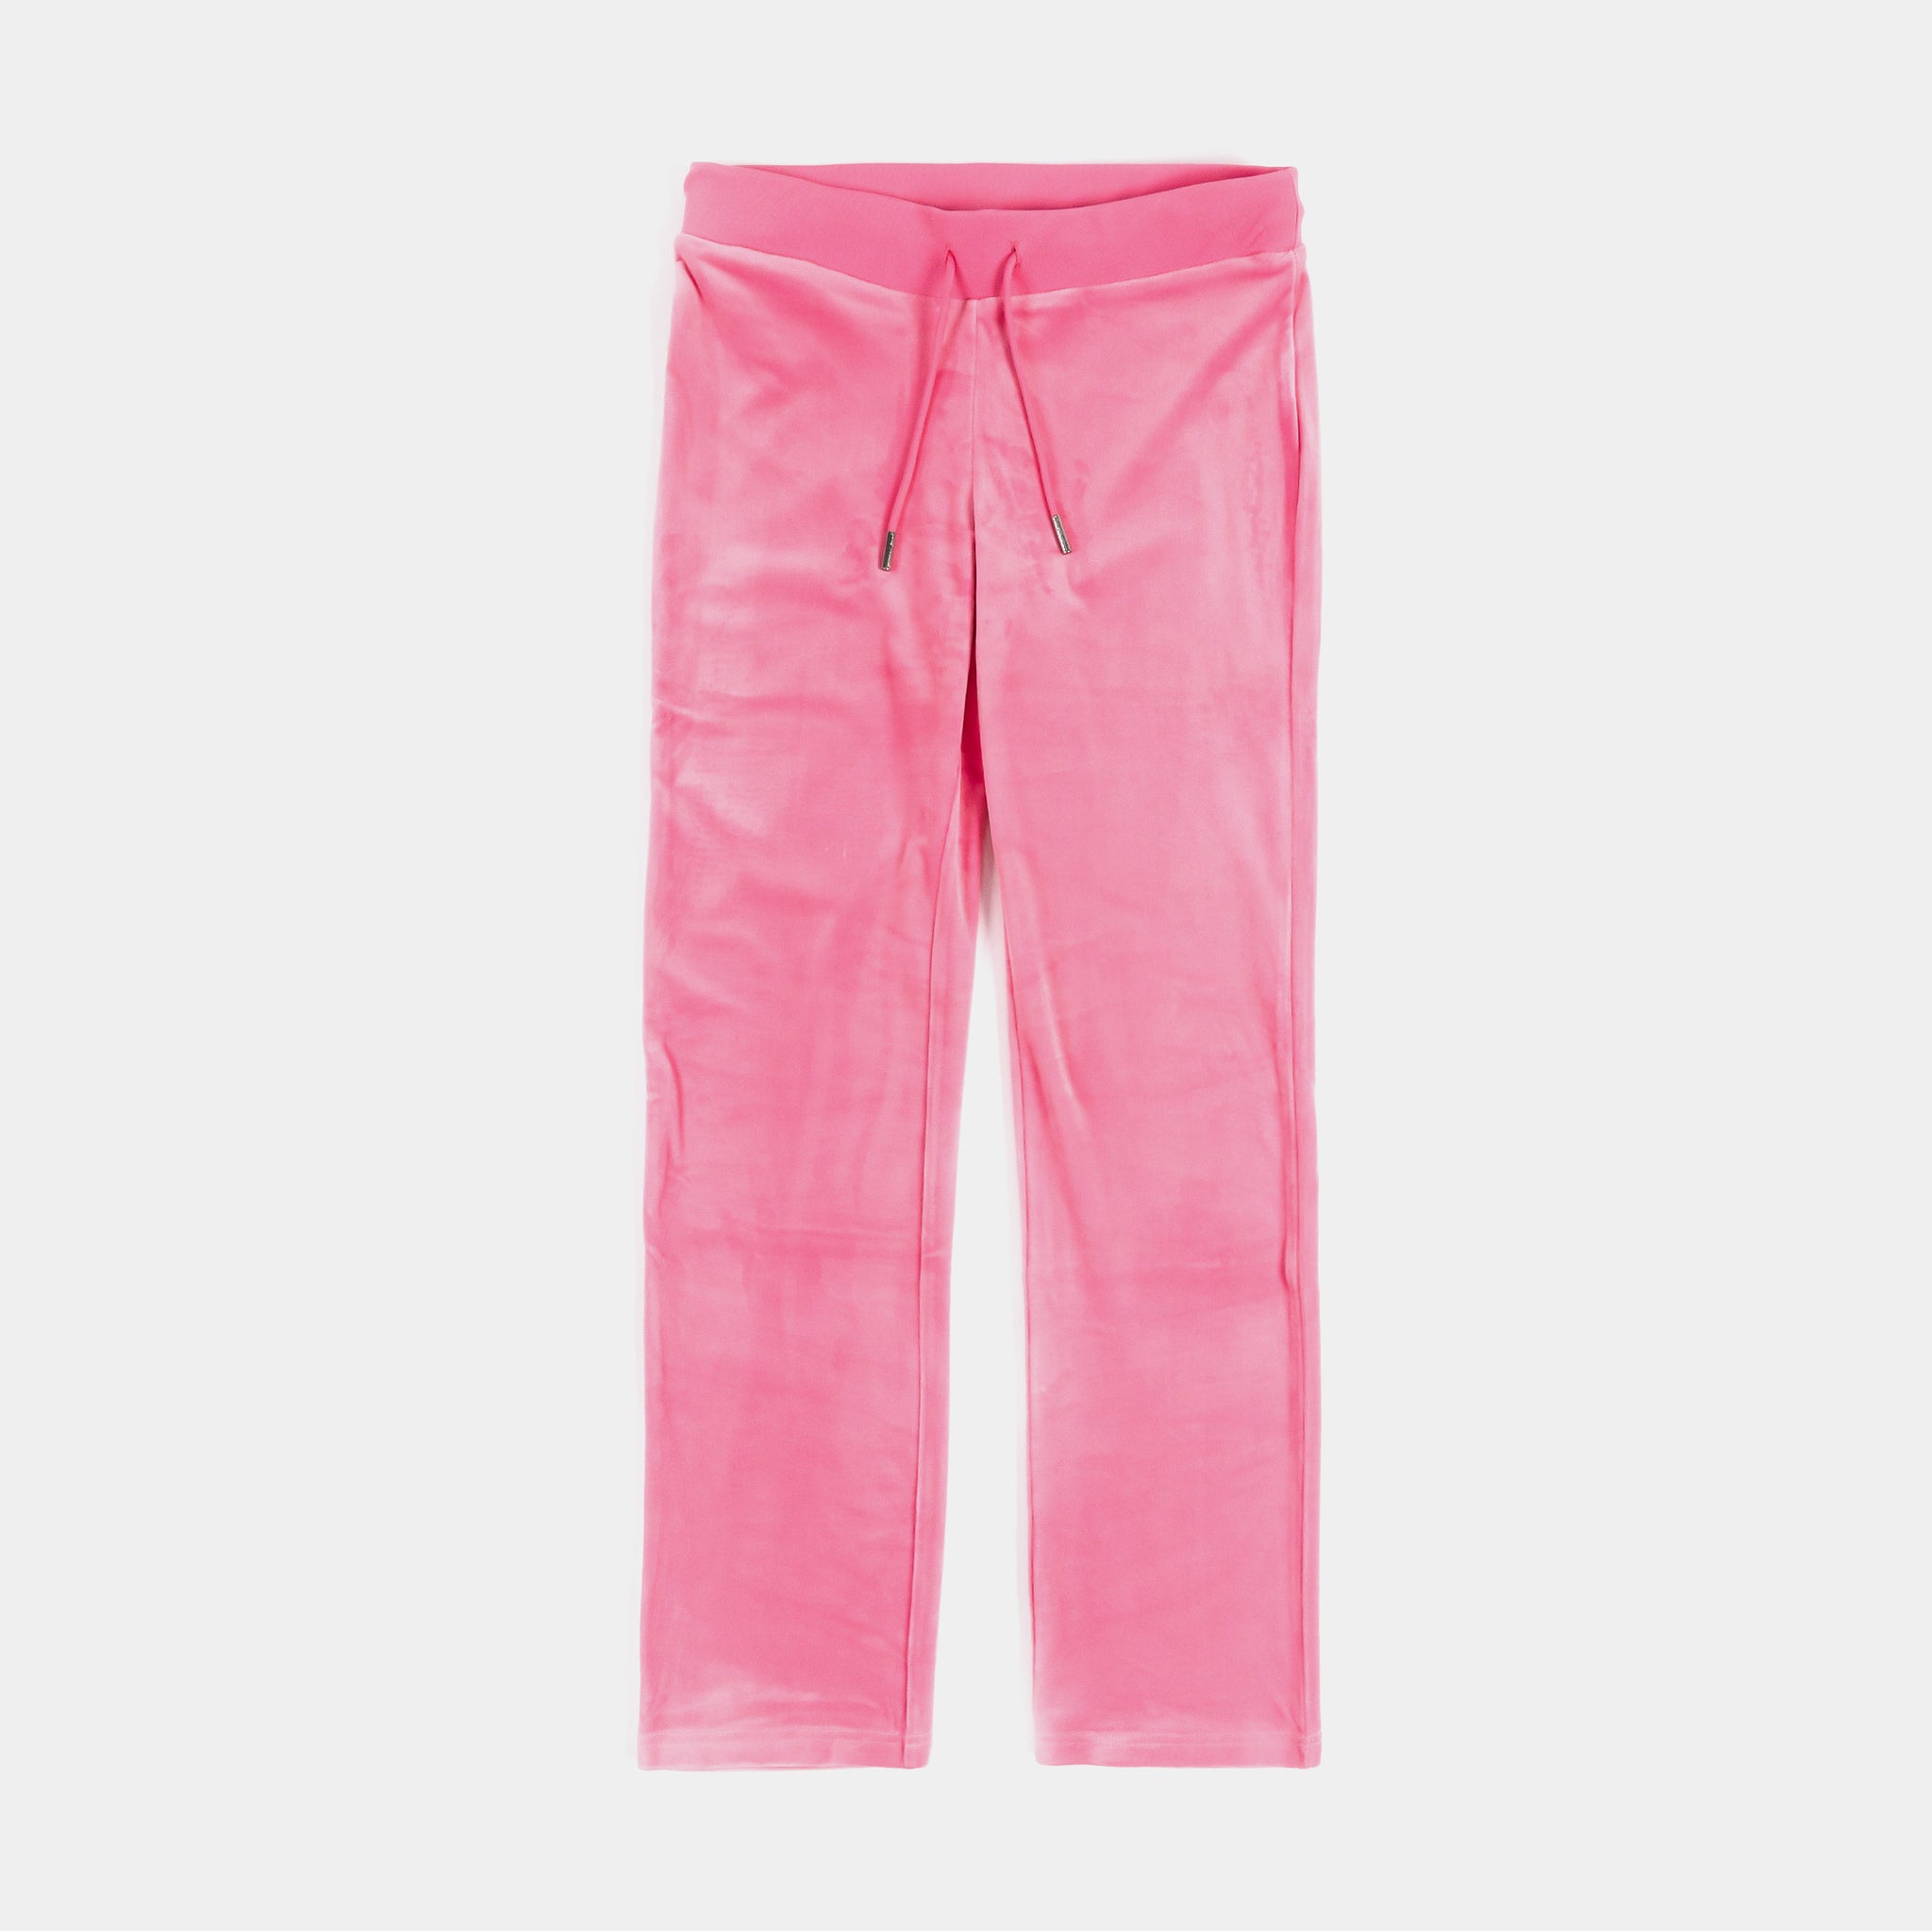 Women's Juicy Couture OG Big Bling Velour Track Pants| JD Sports